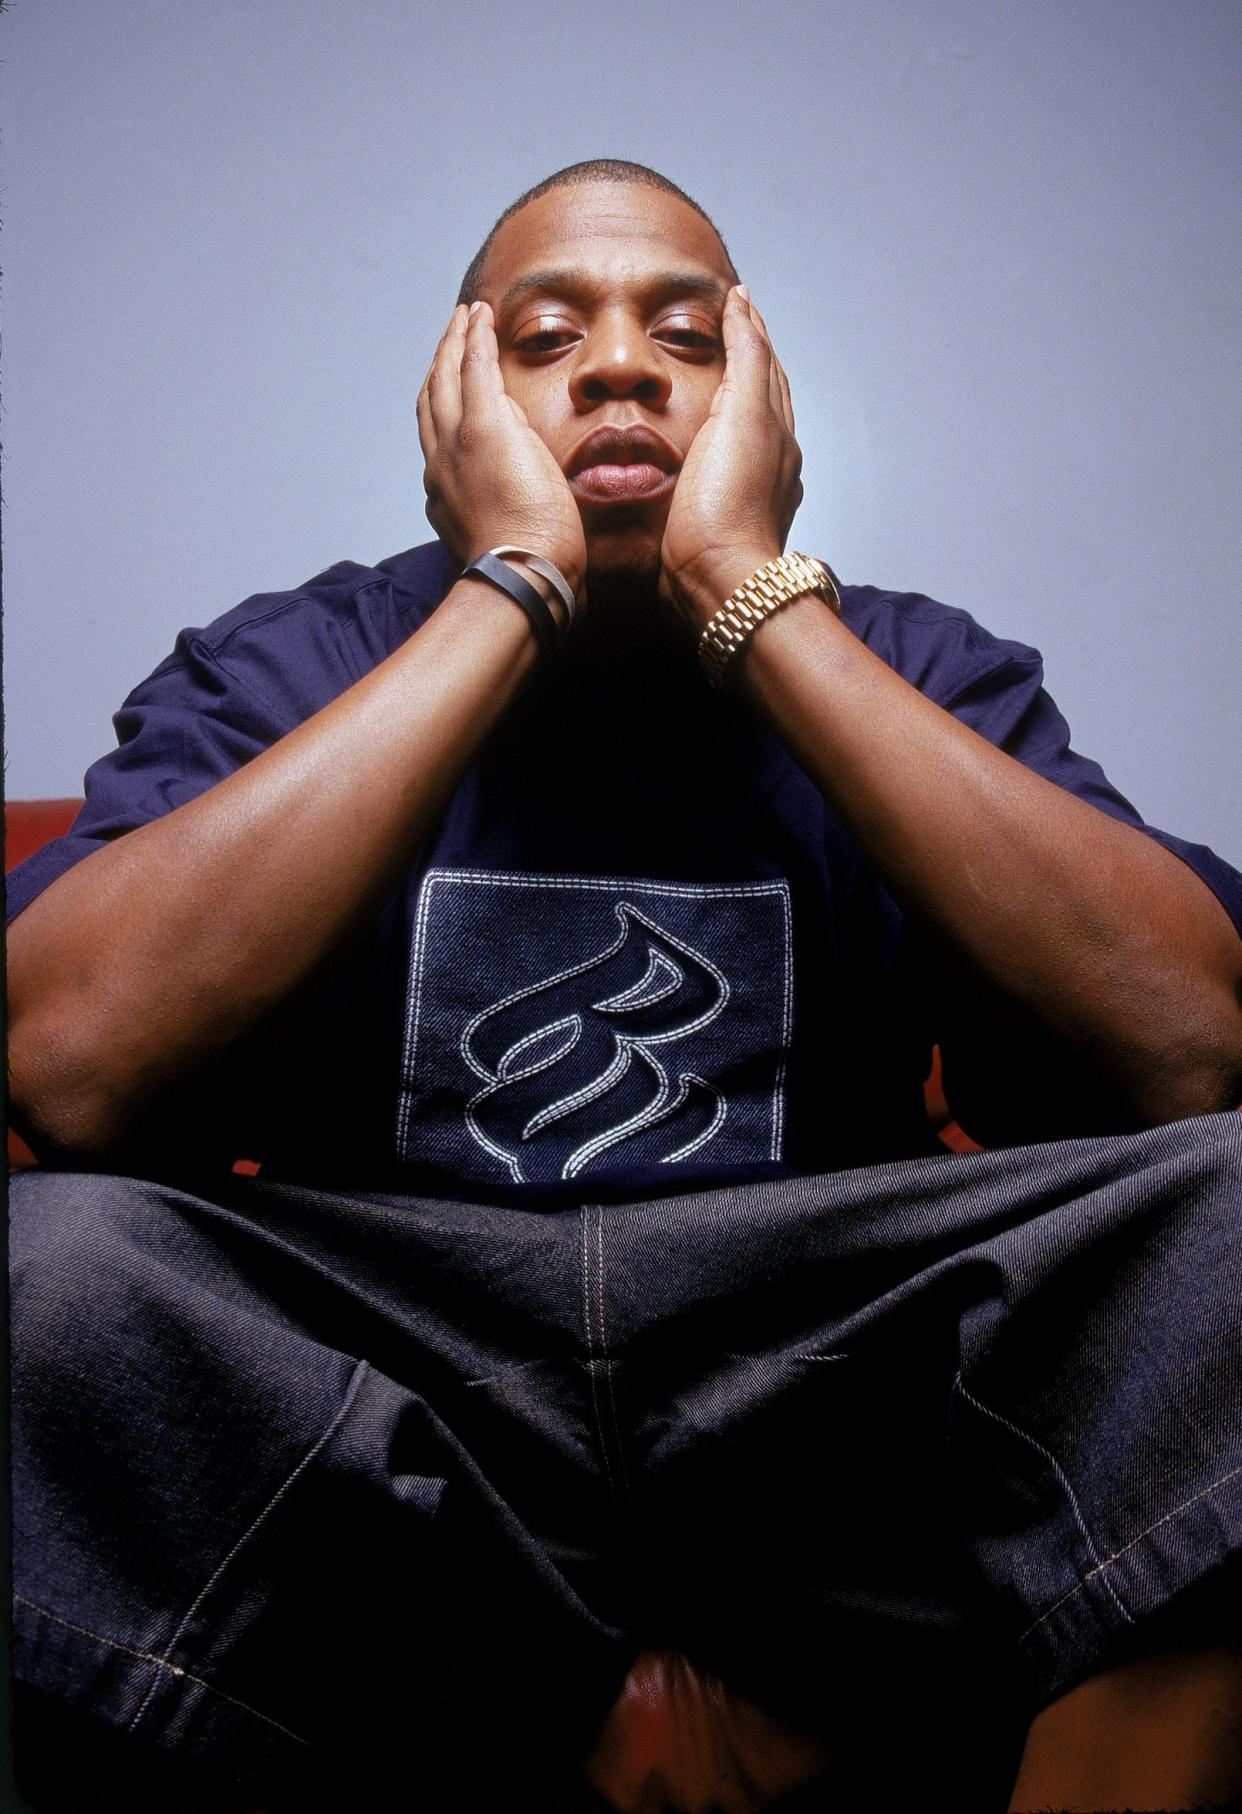 Jay Z poses in Rocawear shirt.